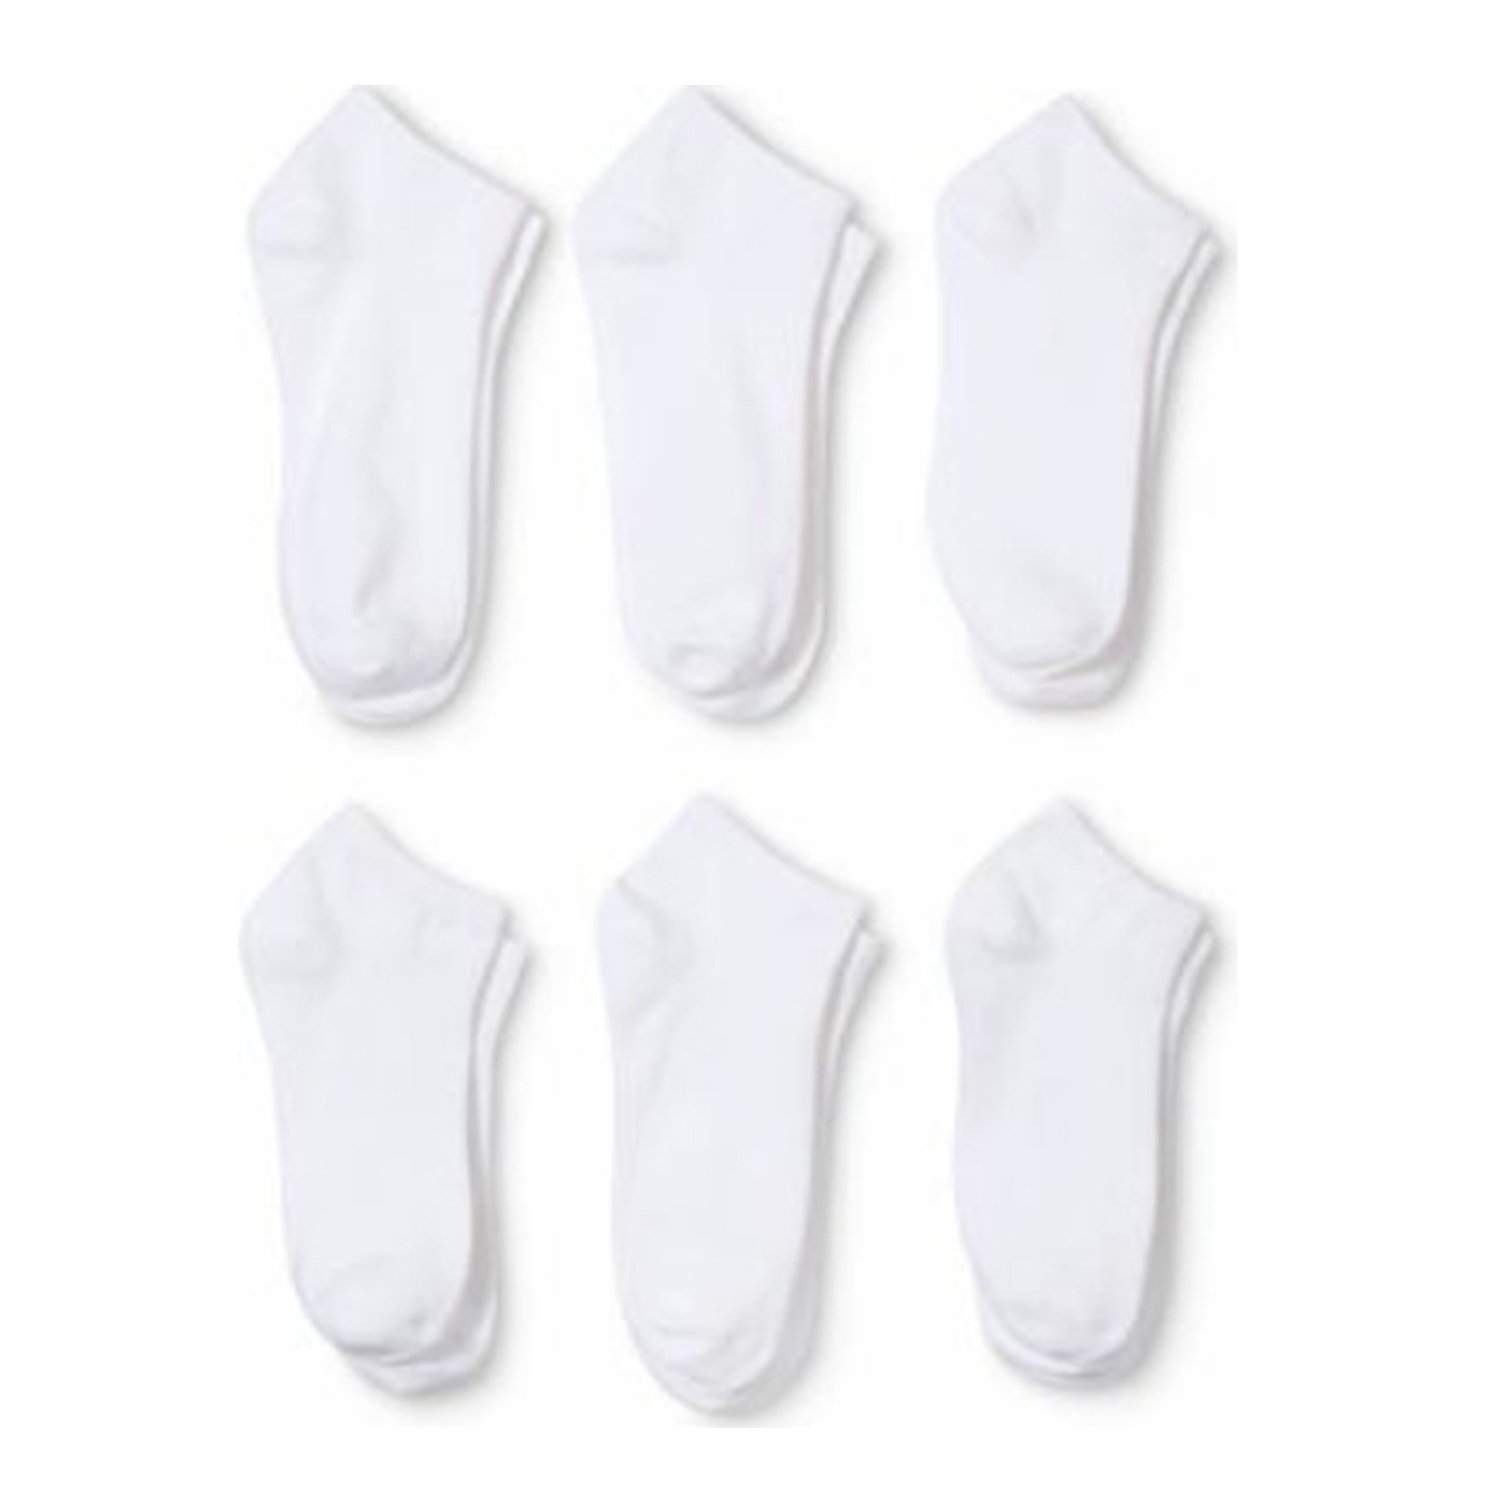 Cotton Ankle Socks  Low Cut, No Show Men and Women Socks - 60 Pack